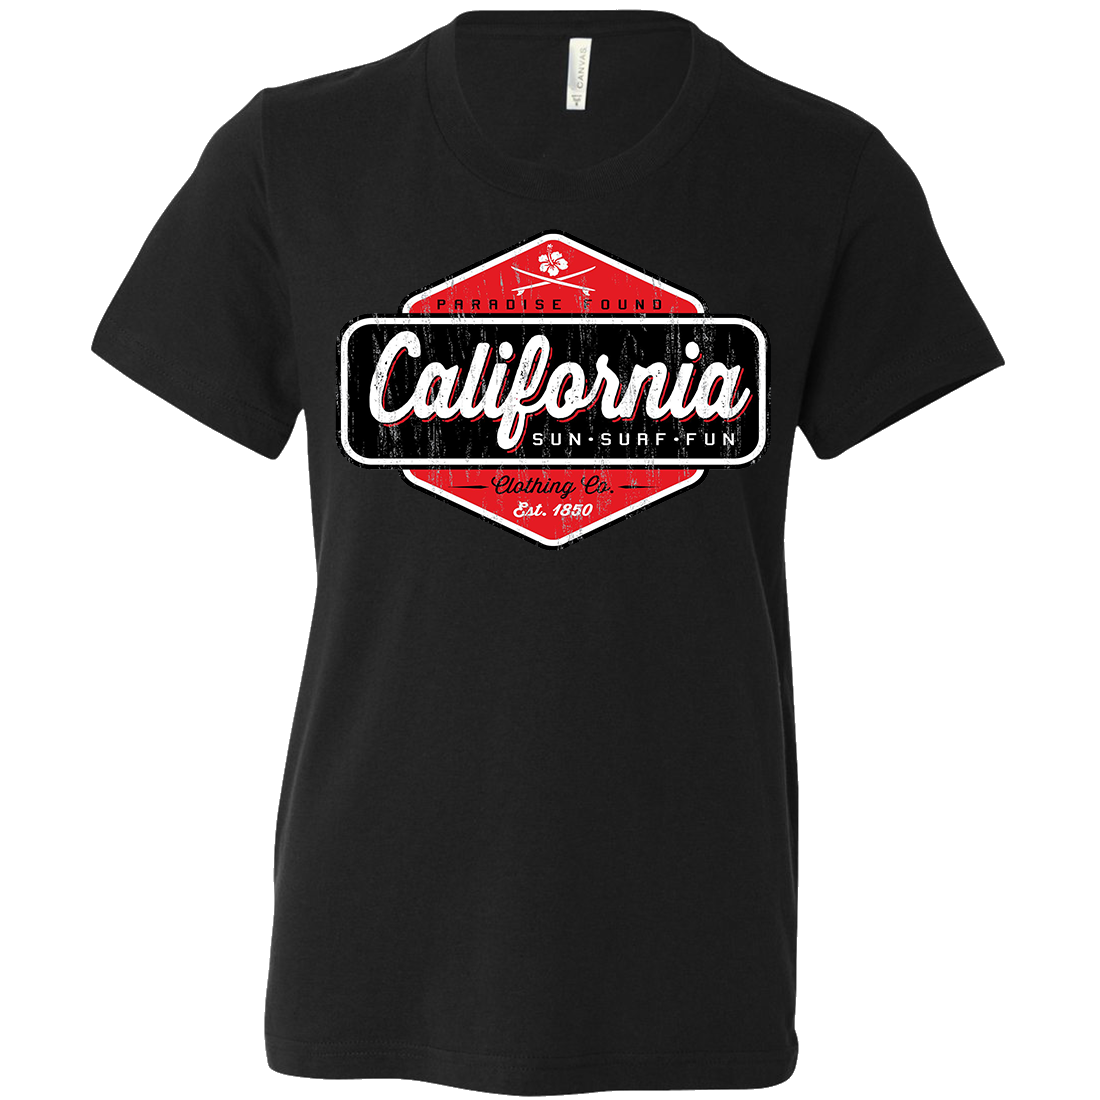 California Paradise Found Asst Colors Youth T-Shirt/tee